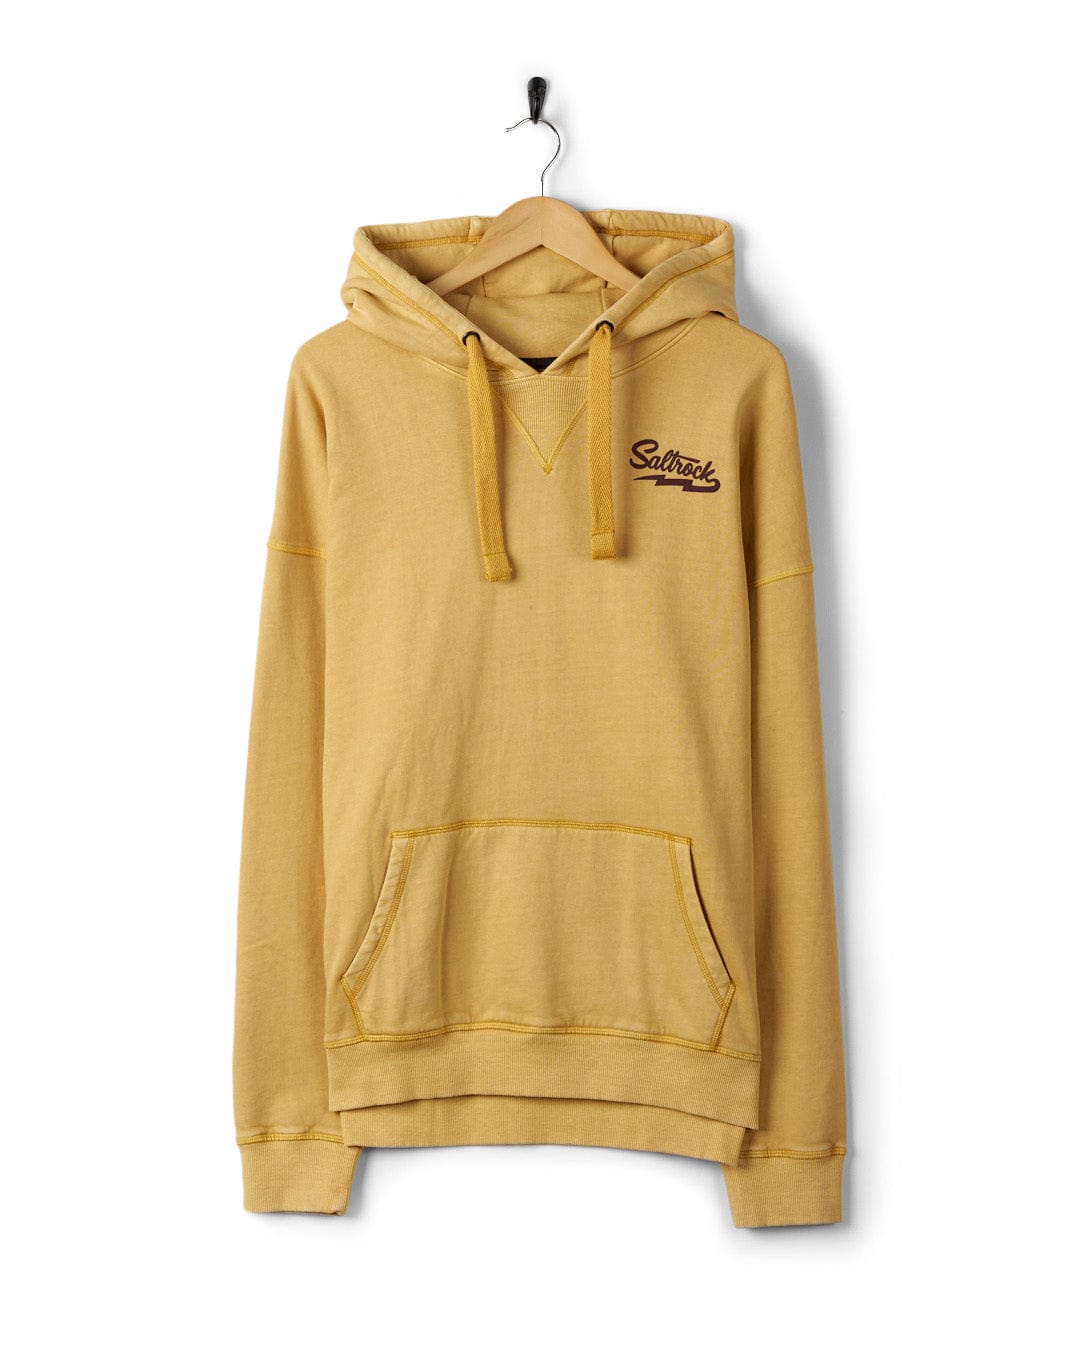 A Gas Station - Recycled Mens Pop Hoodie in Yellow with a kangaroo pocket and the word "sabotage" embroidered on the left chest, displayed on a hanger against a white background by Saltrock.